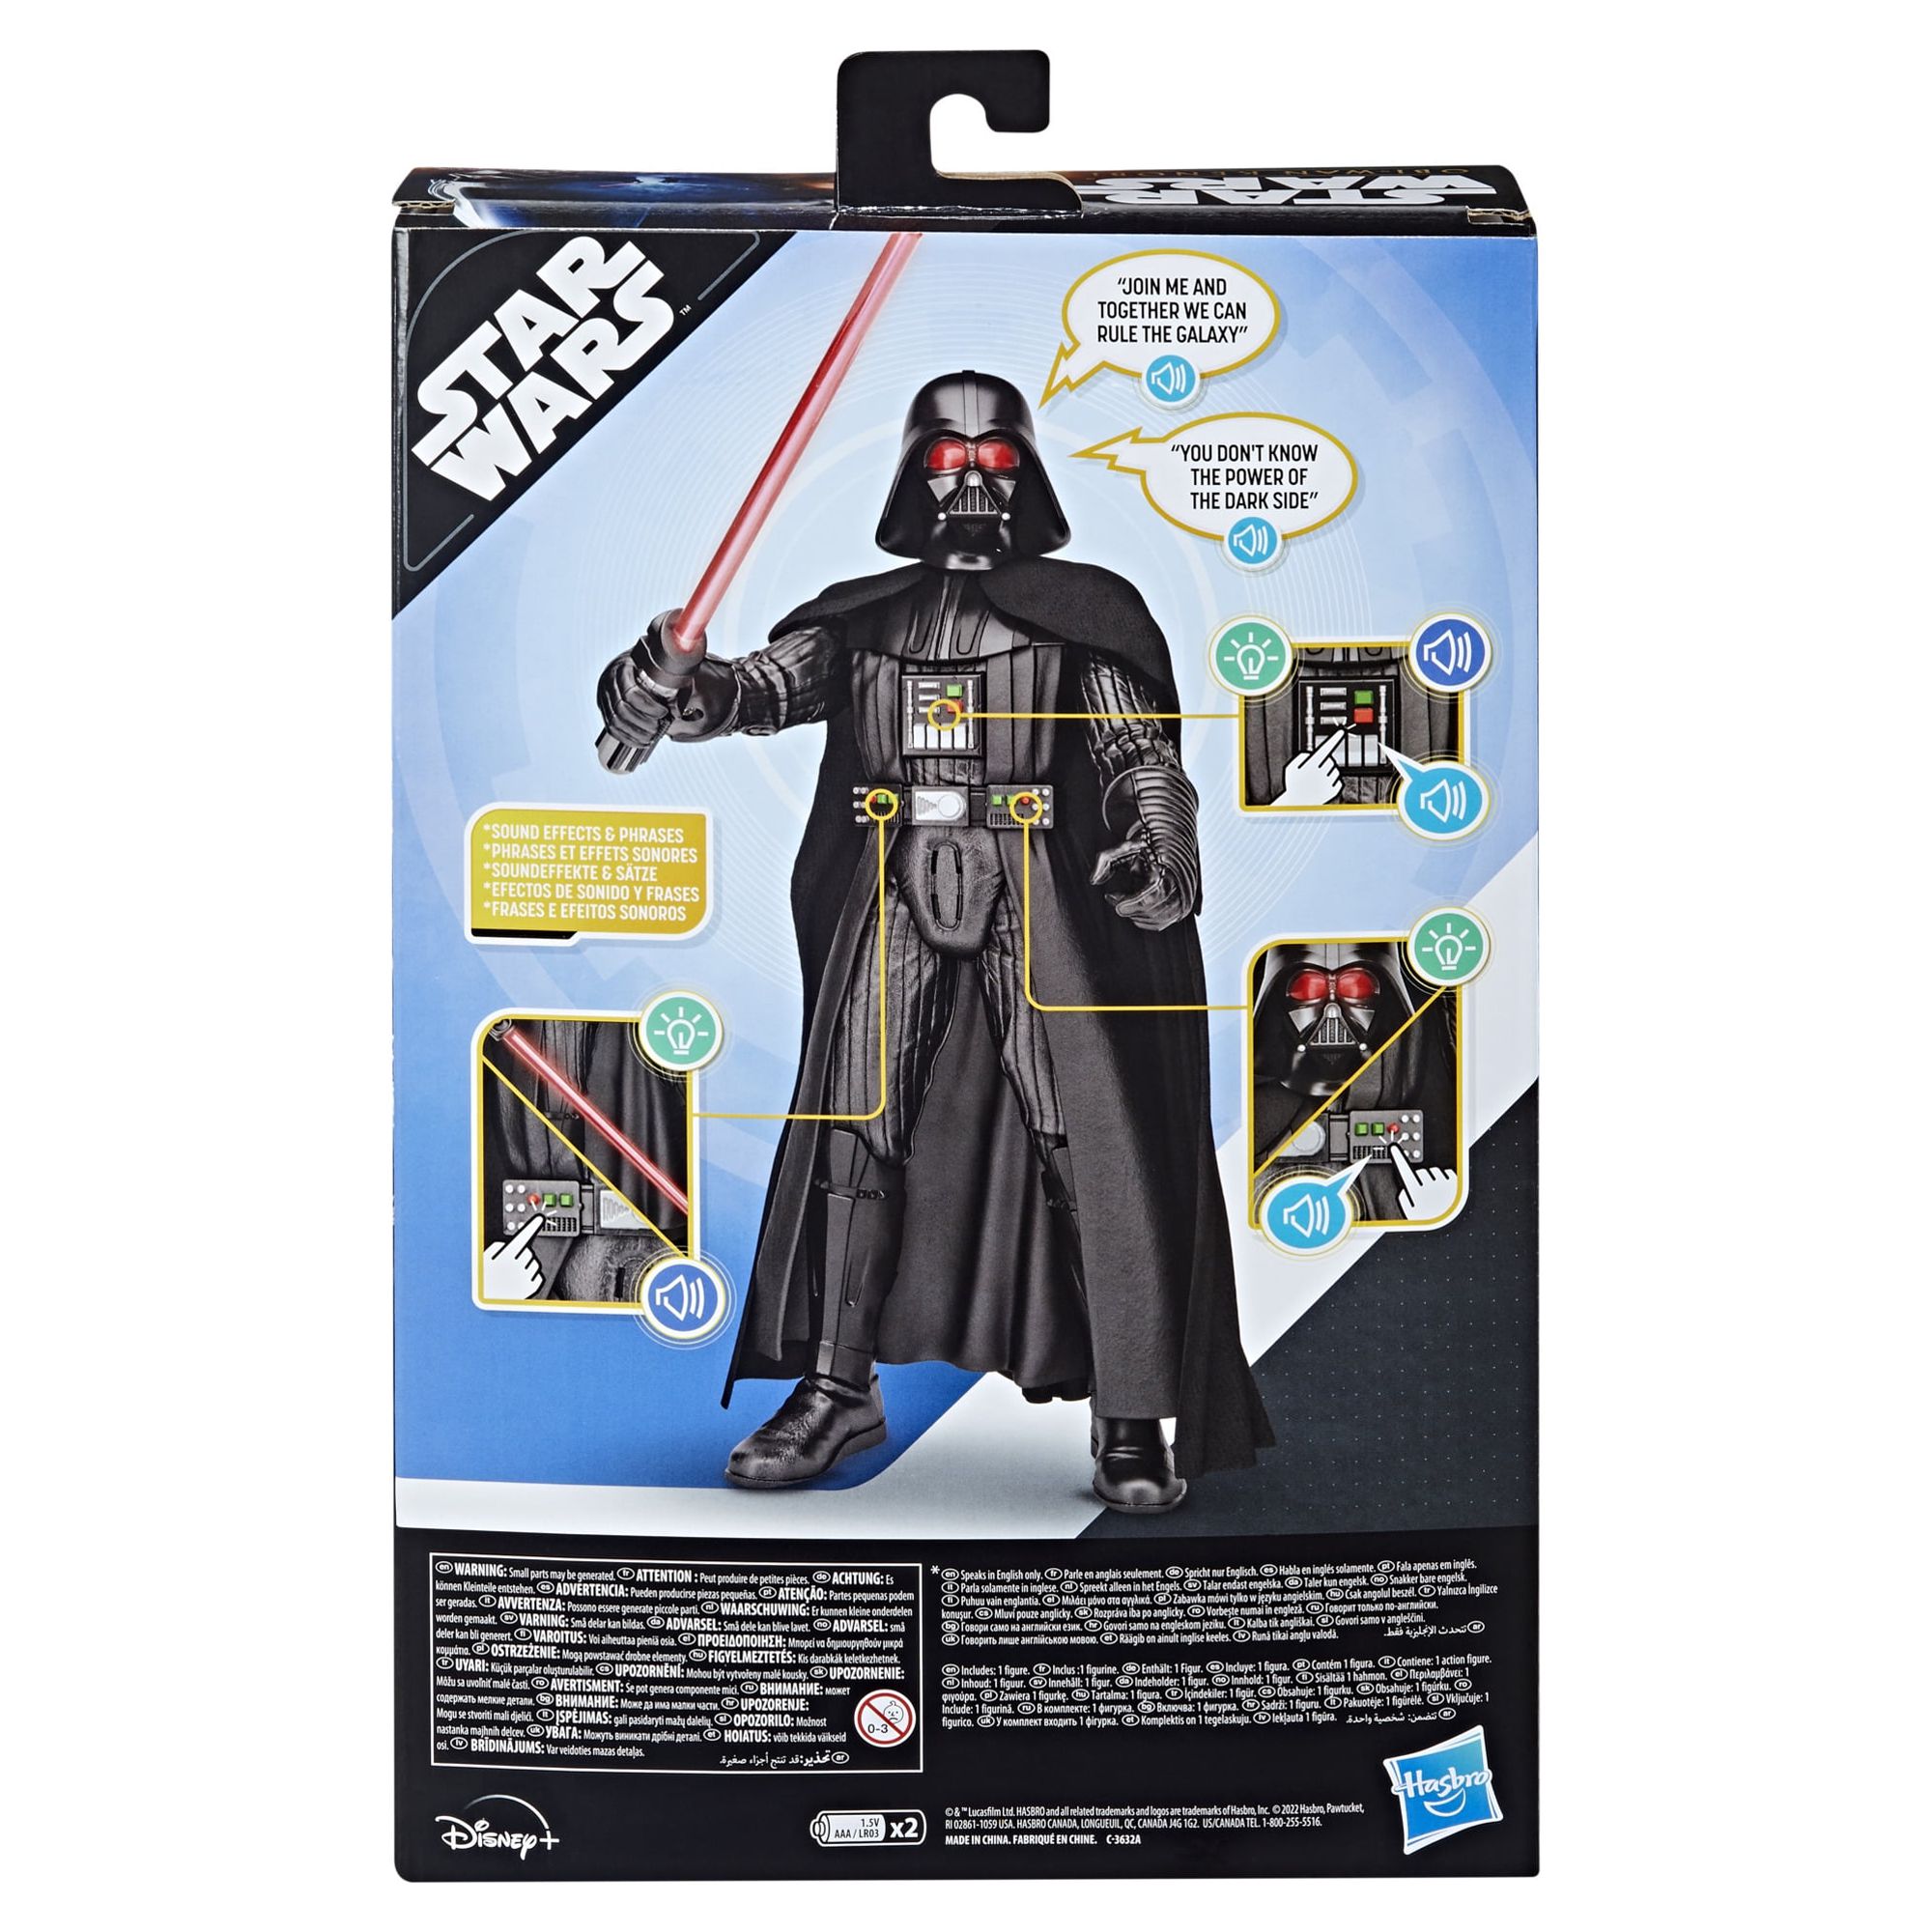 Star Wars: Obi-Wan Kenobi Darth Vader Toy Action Figure for Boys and Girls Ages 4 5 6 7 8 and Up (12”) - image 4 of 11